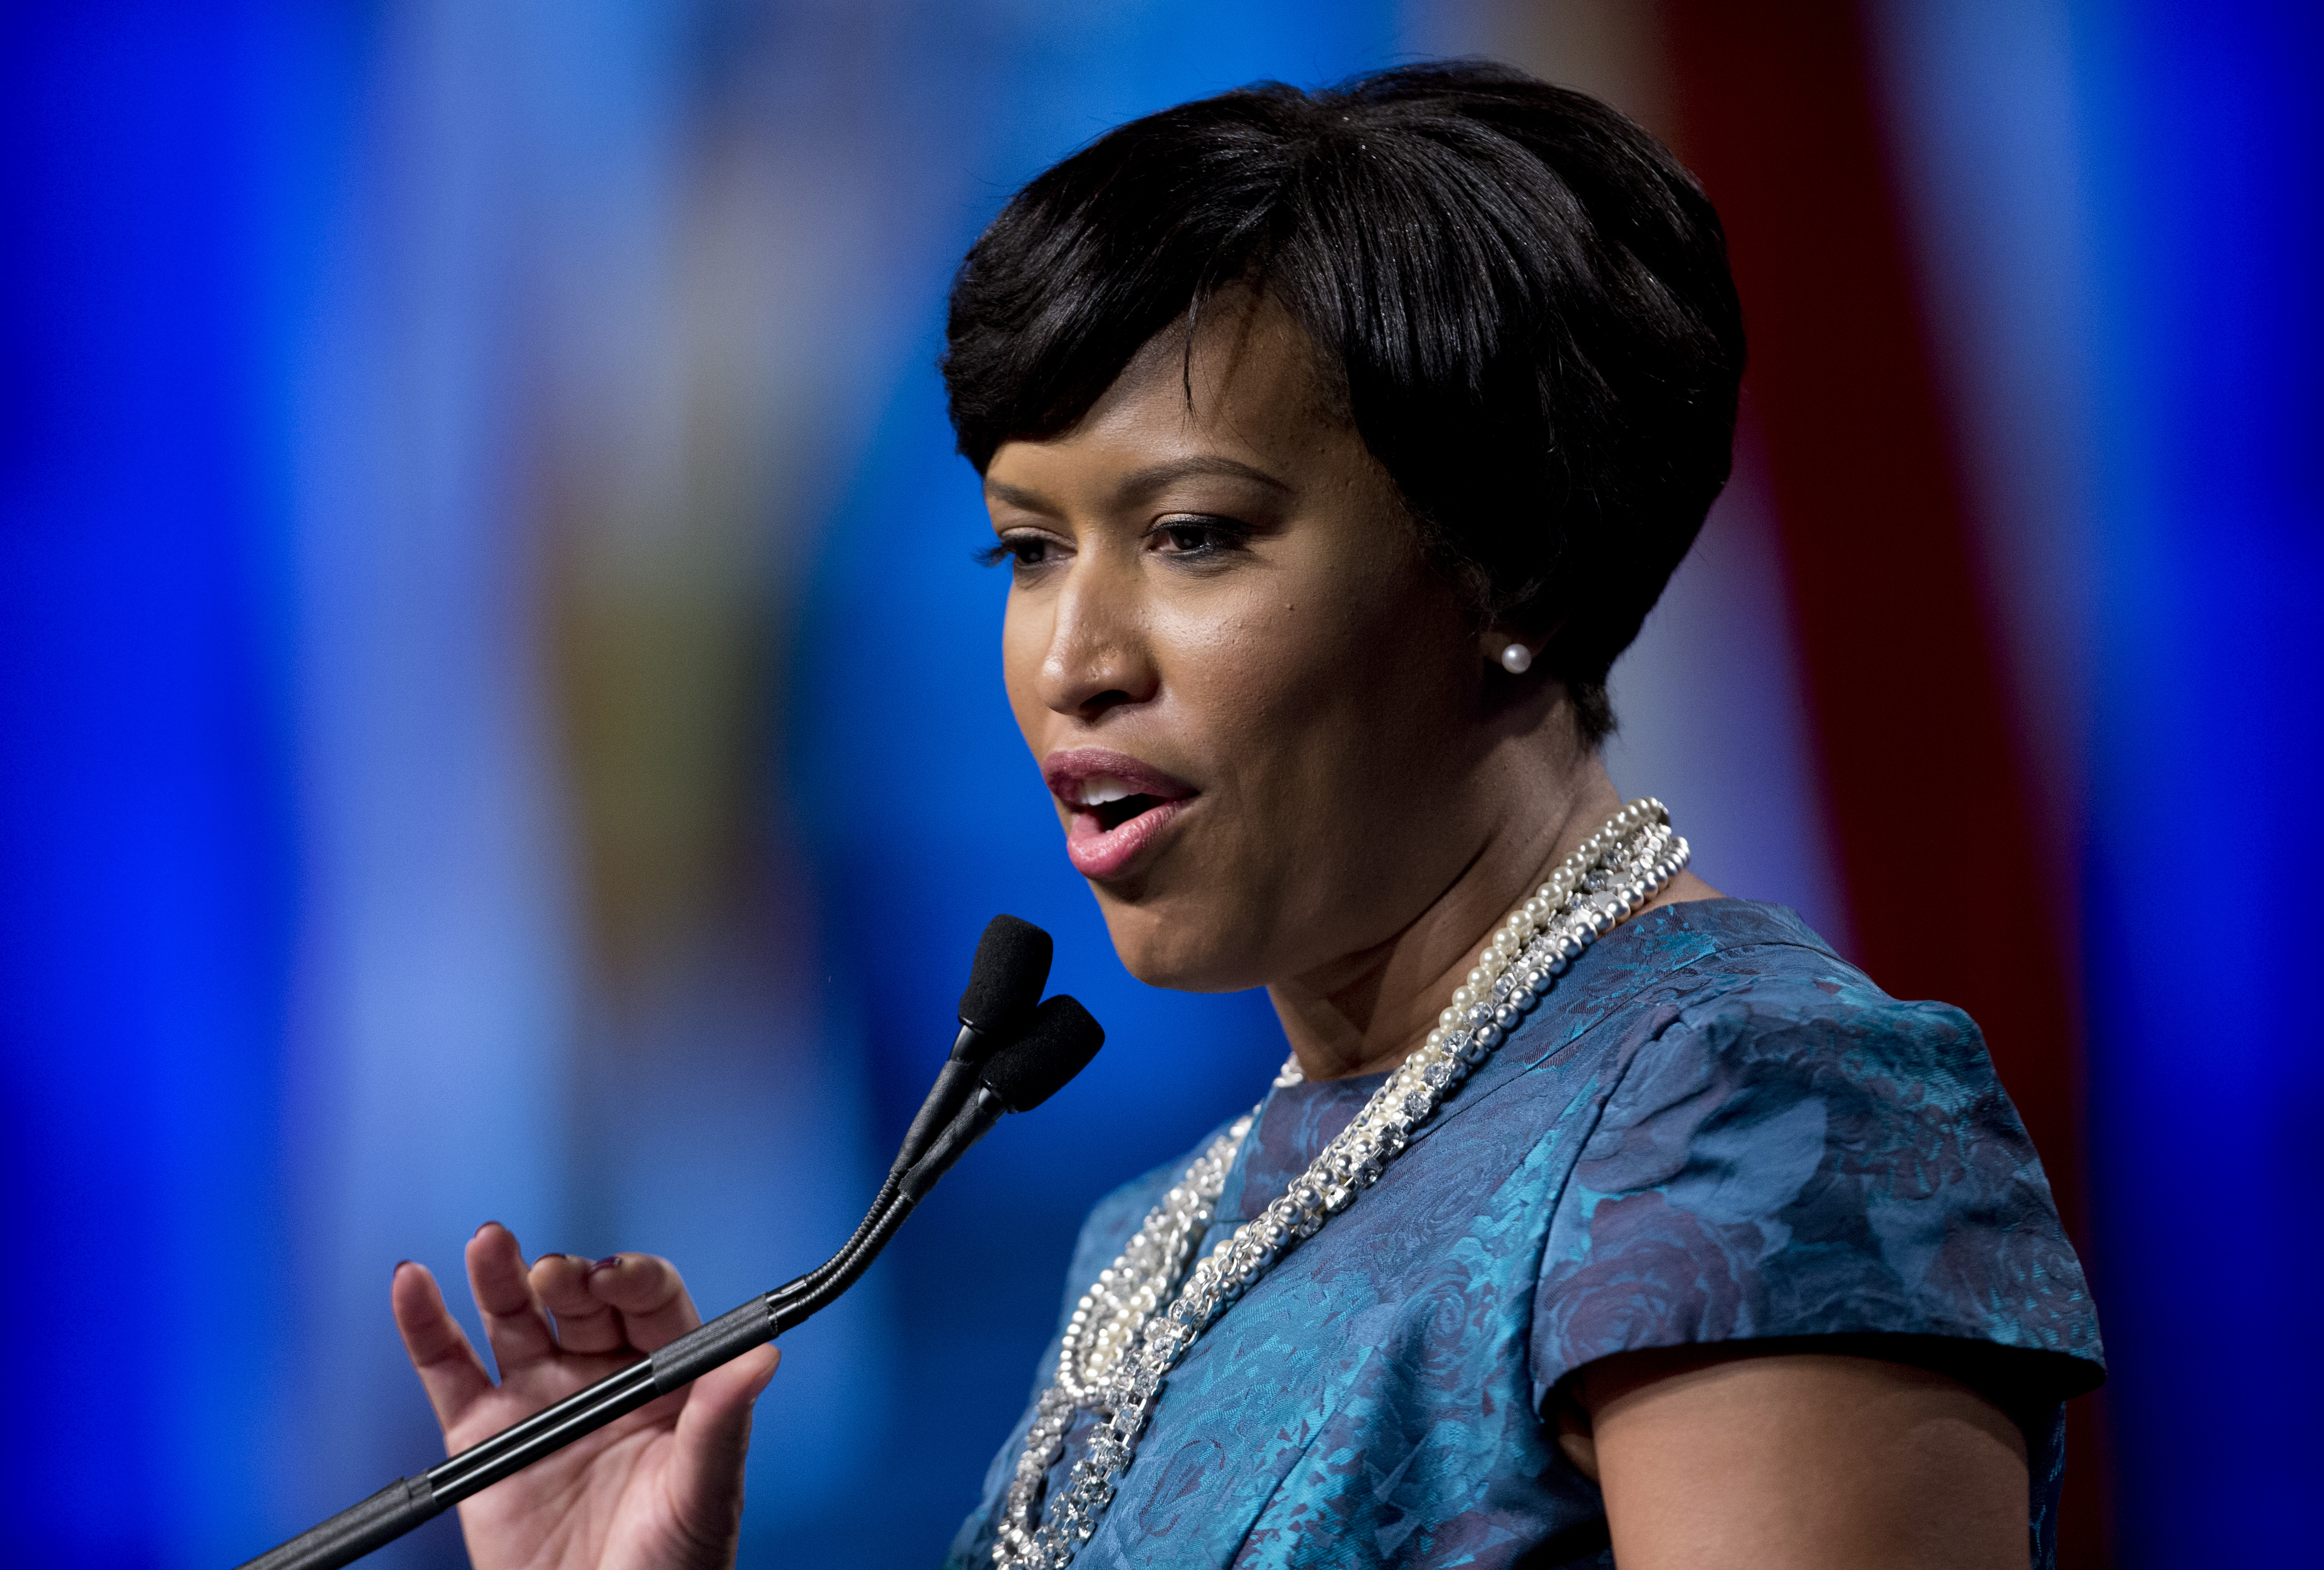 D.C. mayor outlines plans for minimum wage, public safety in address